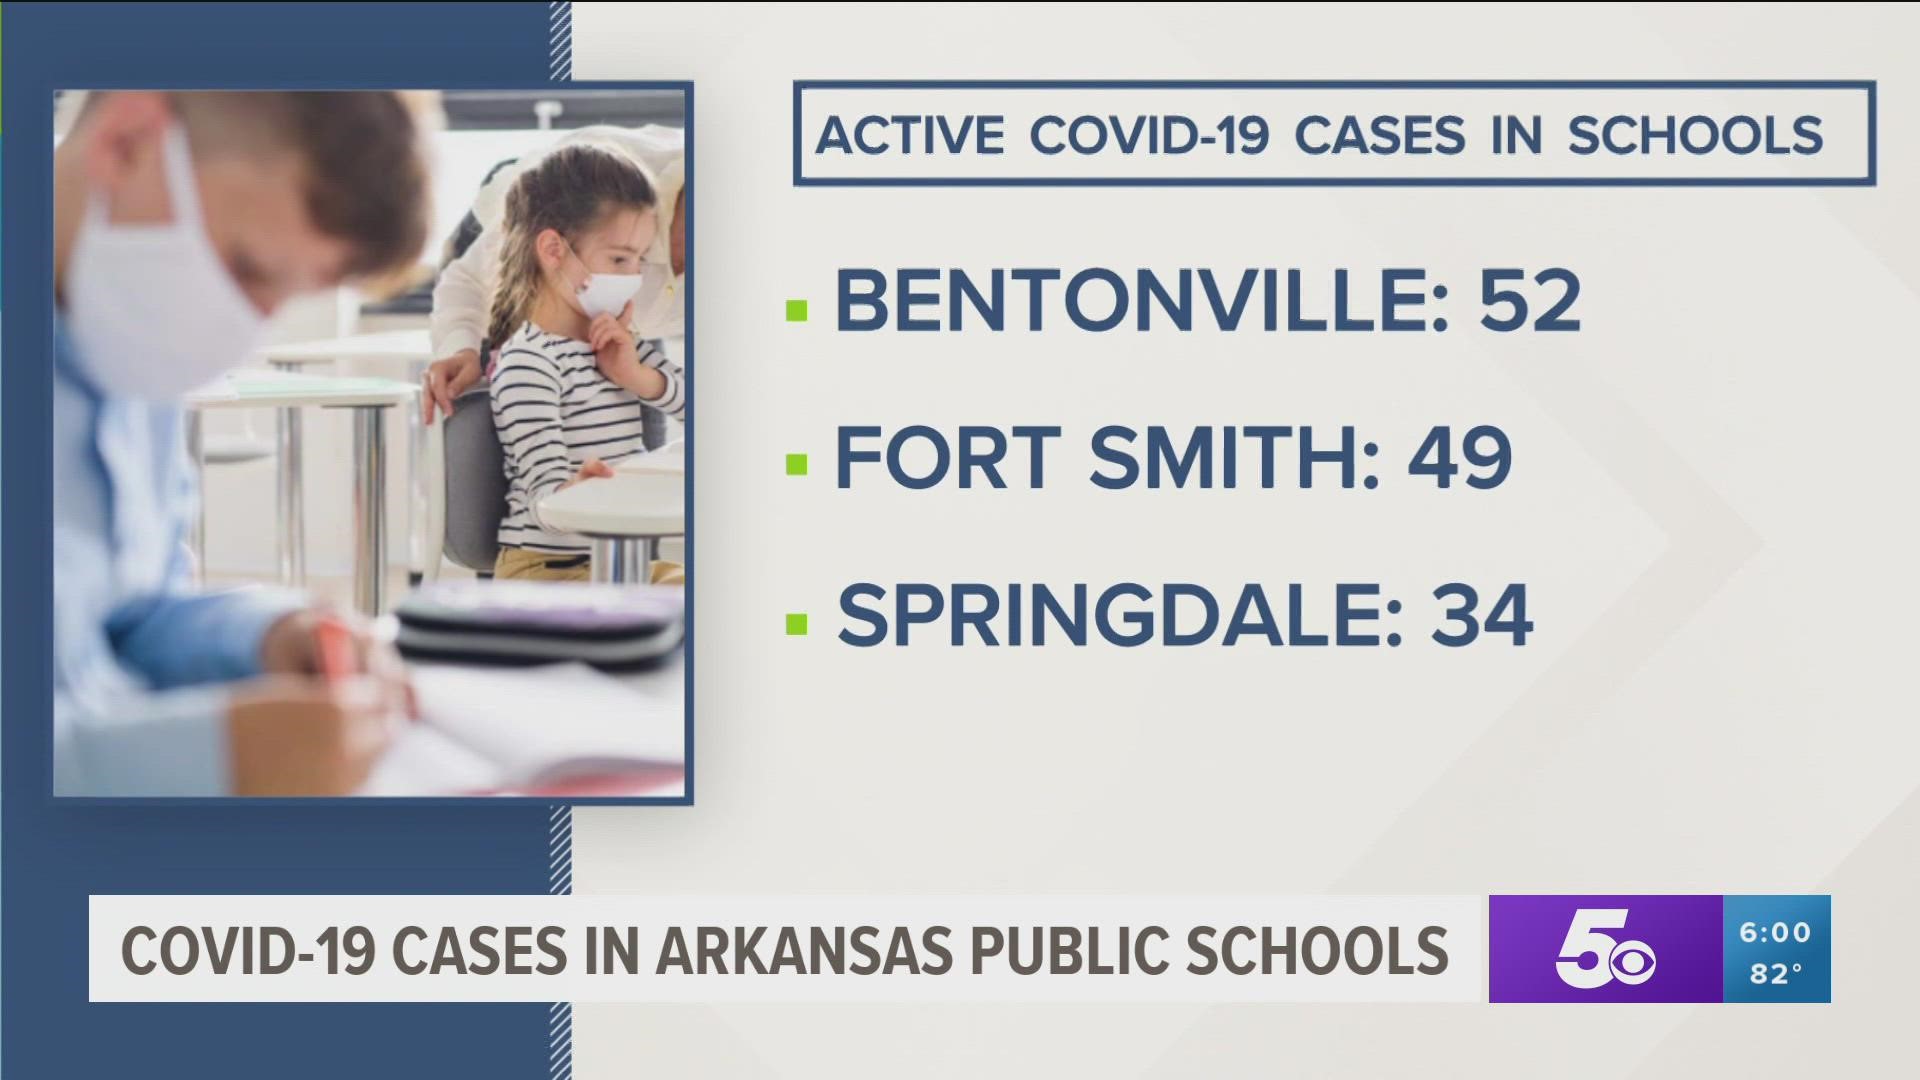 Arkansas public schools are reporting 1347 active COVID-19 cases as of August 16th, which was the first day of school for many districts across the state.